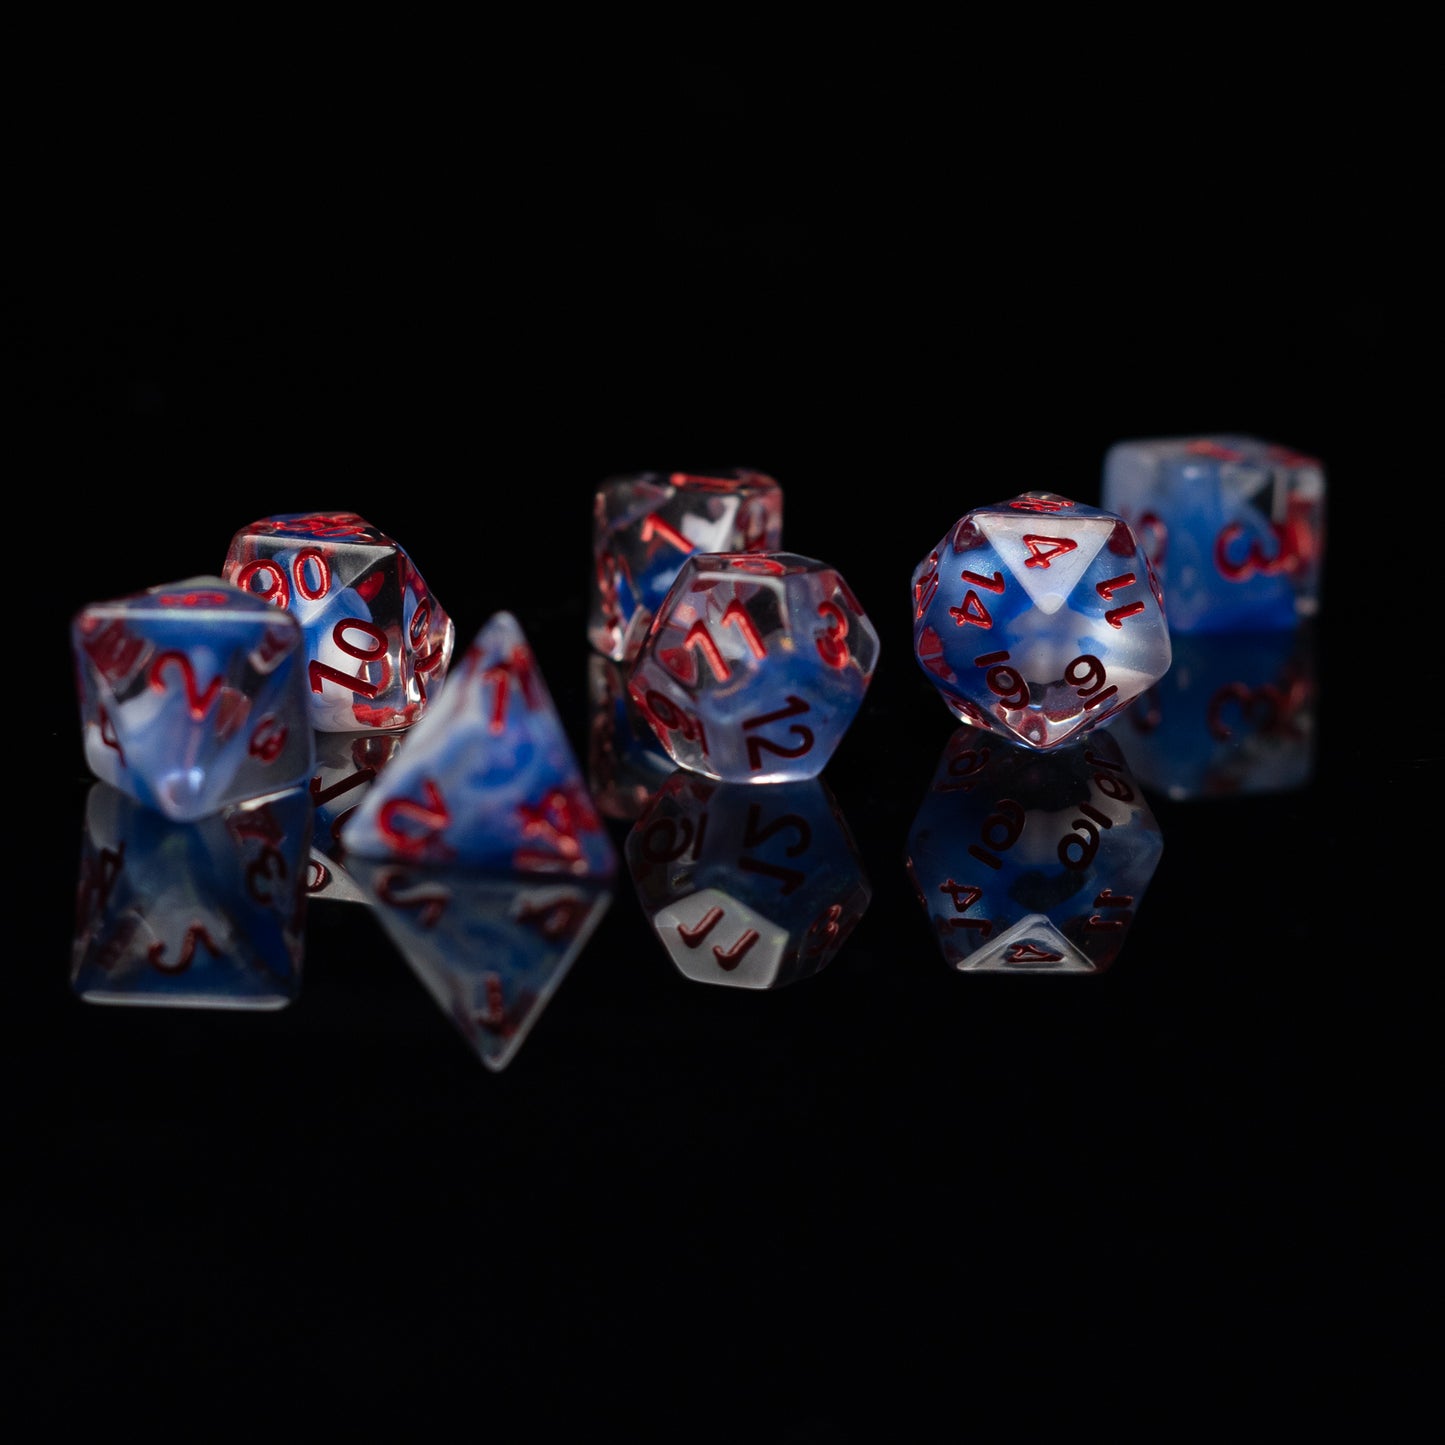 Roll Britannia Acrylic Dnd Dice Set with Red and Blue Translucent Ocean Aesthetic